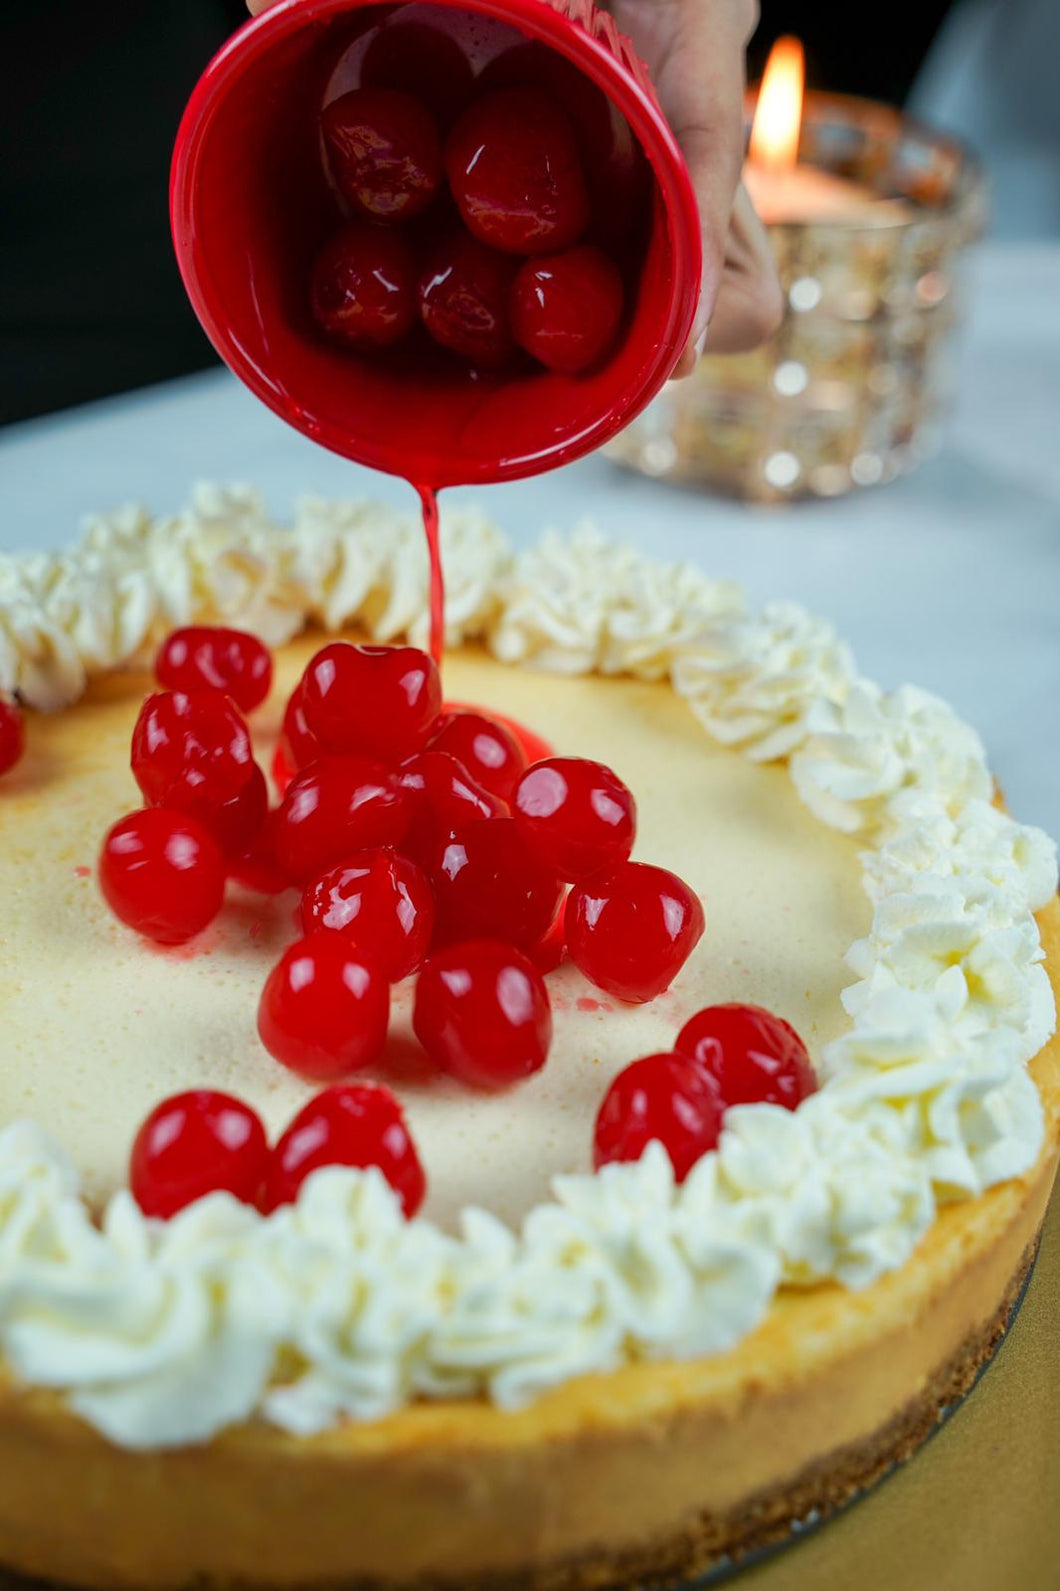 Cherry Classic Cheesecake - Size 9 inch - Serve 8 or 10 Persons